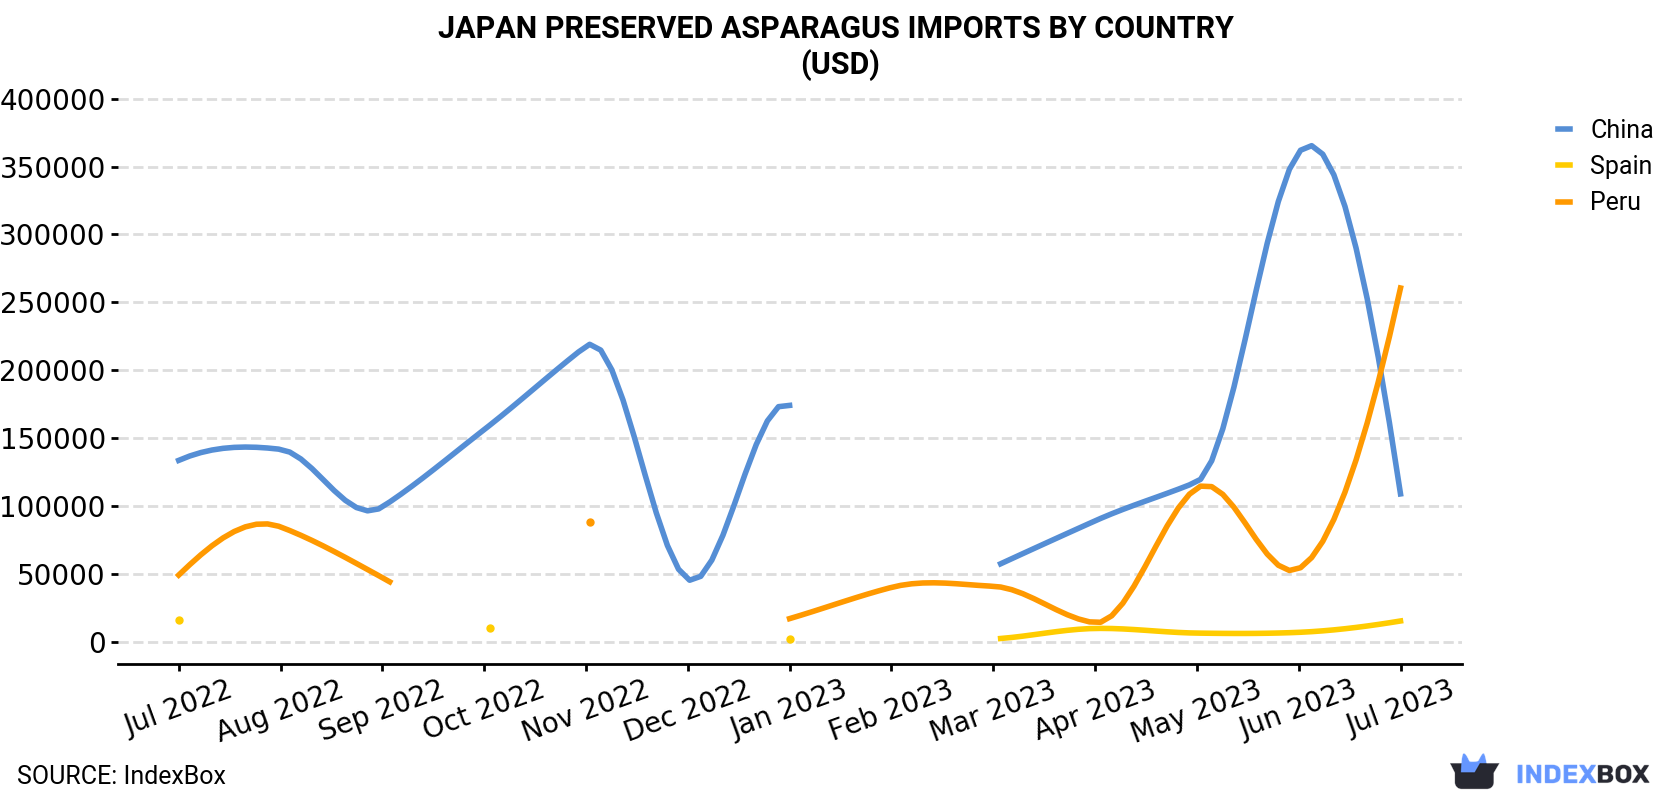 Japan Preserved Asparagus Imports By Country (USD)